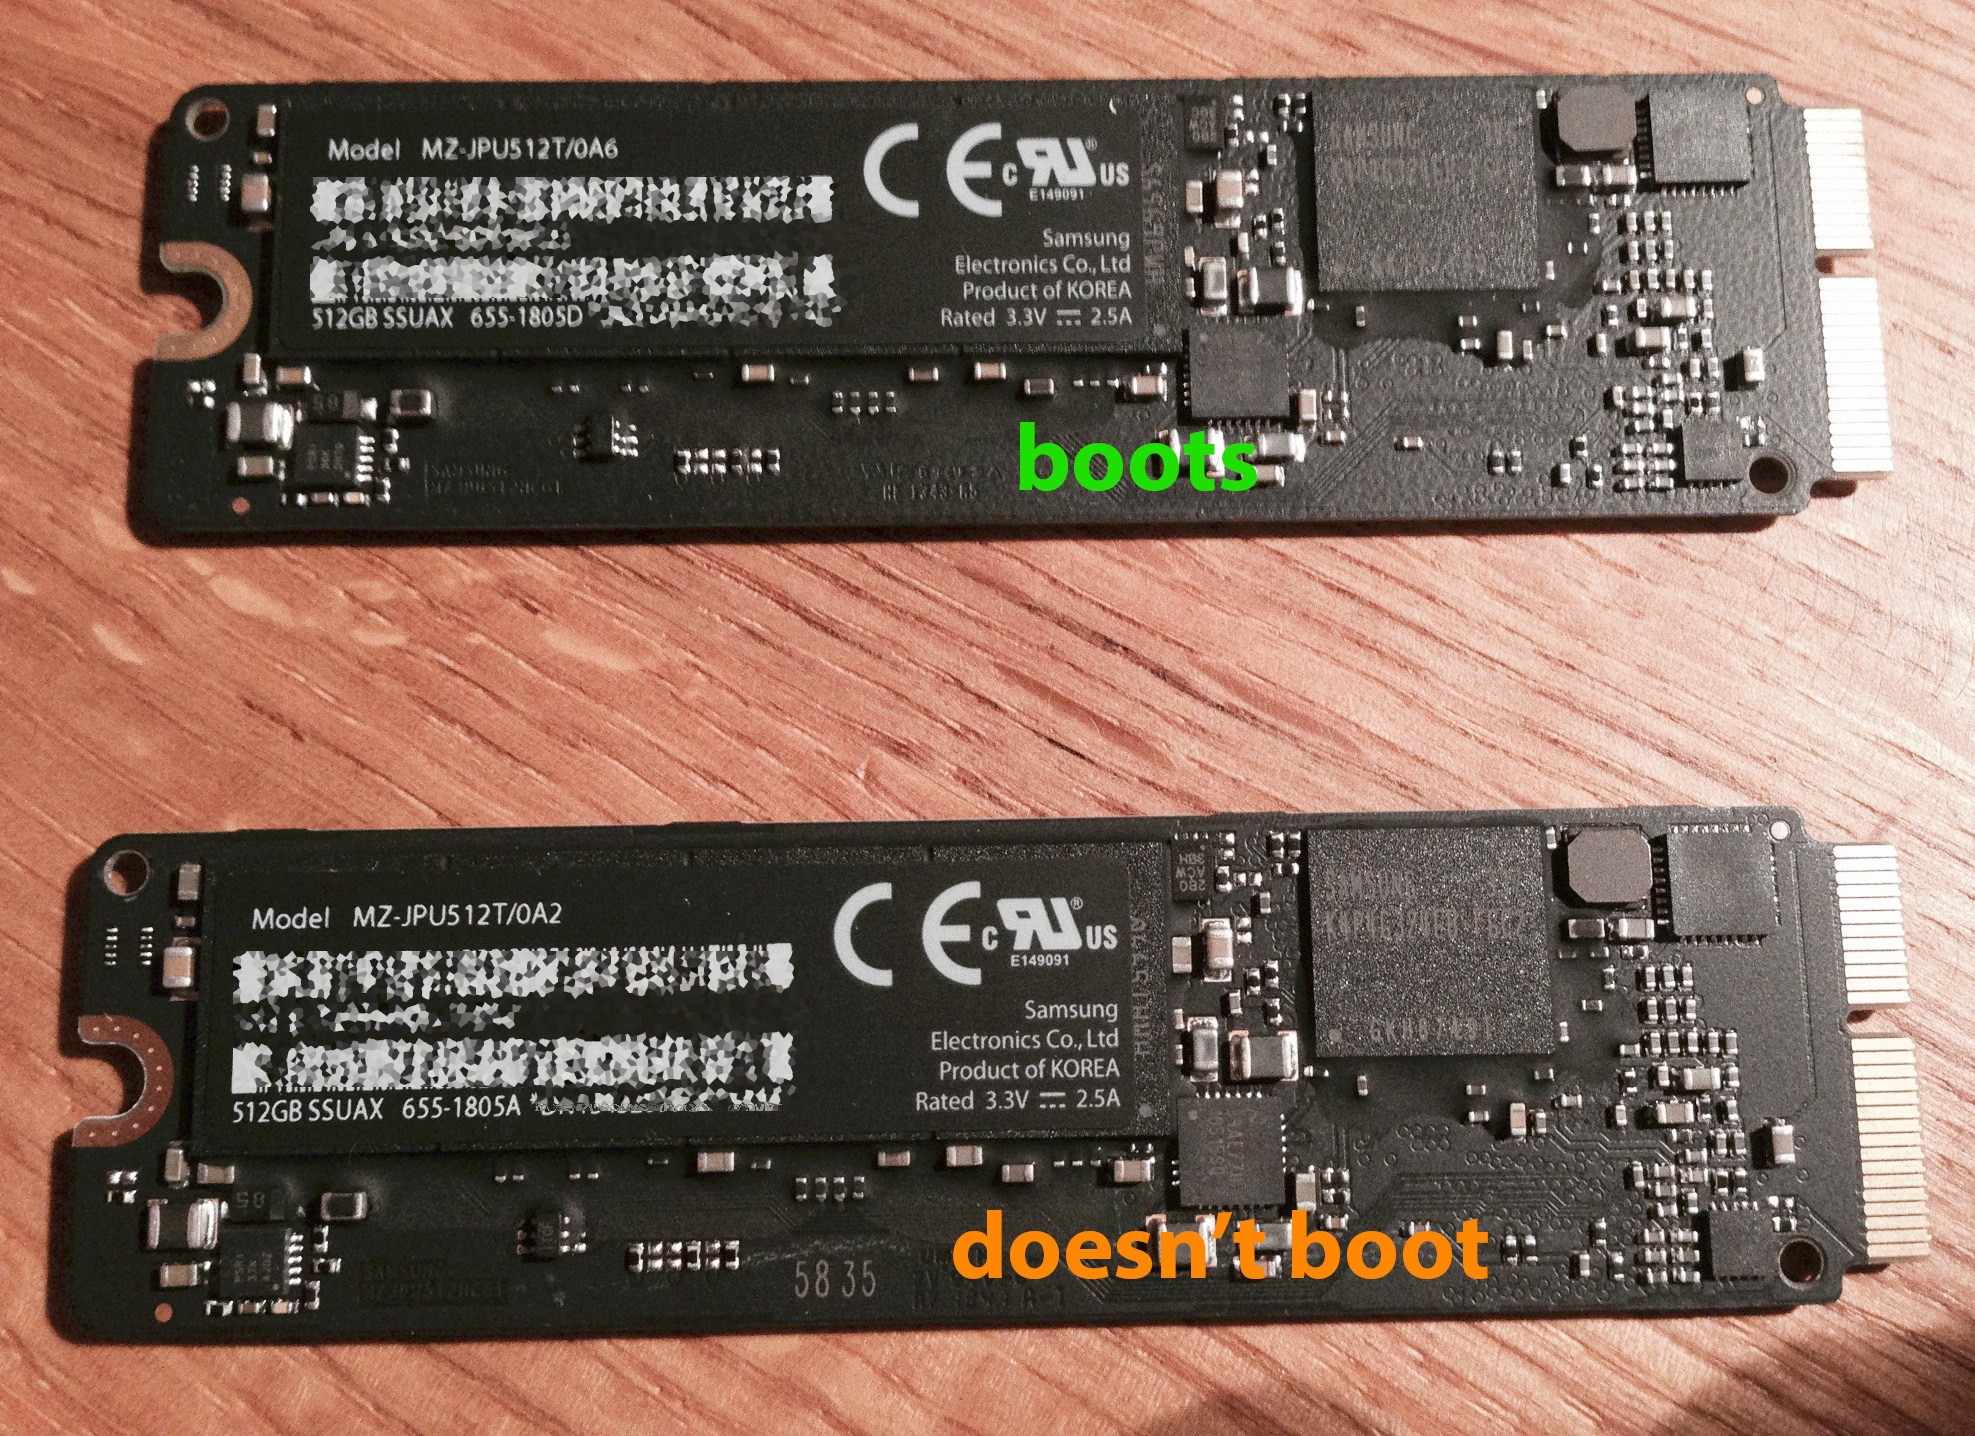 SSD in MBP 13" Retina 2013 doesn't - Apple Community